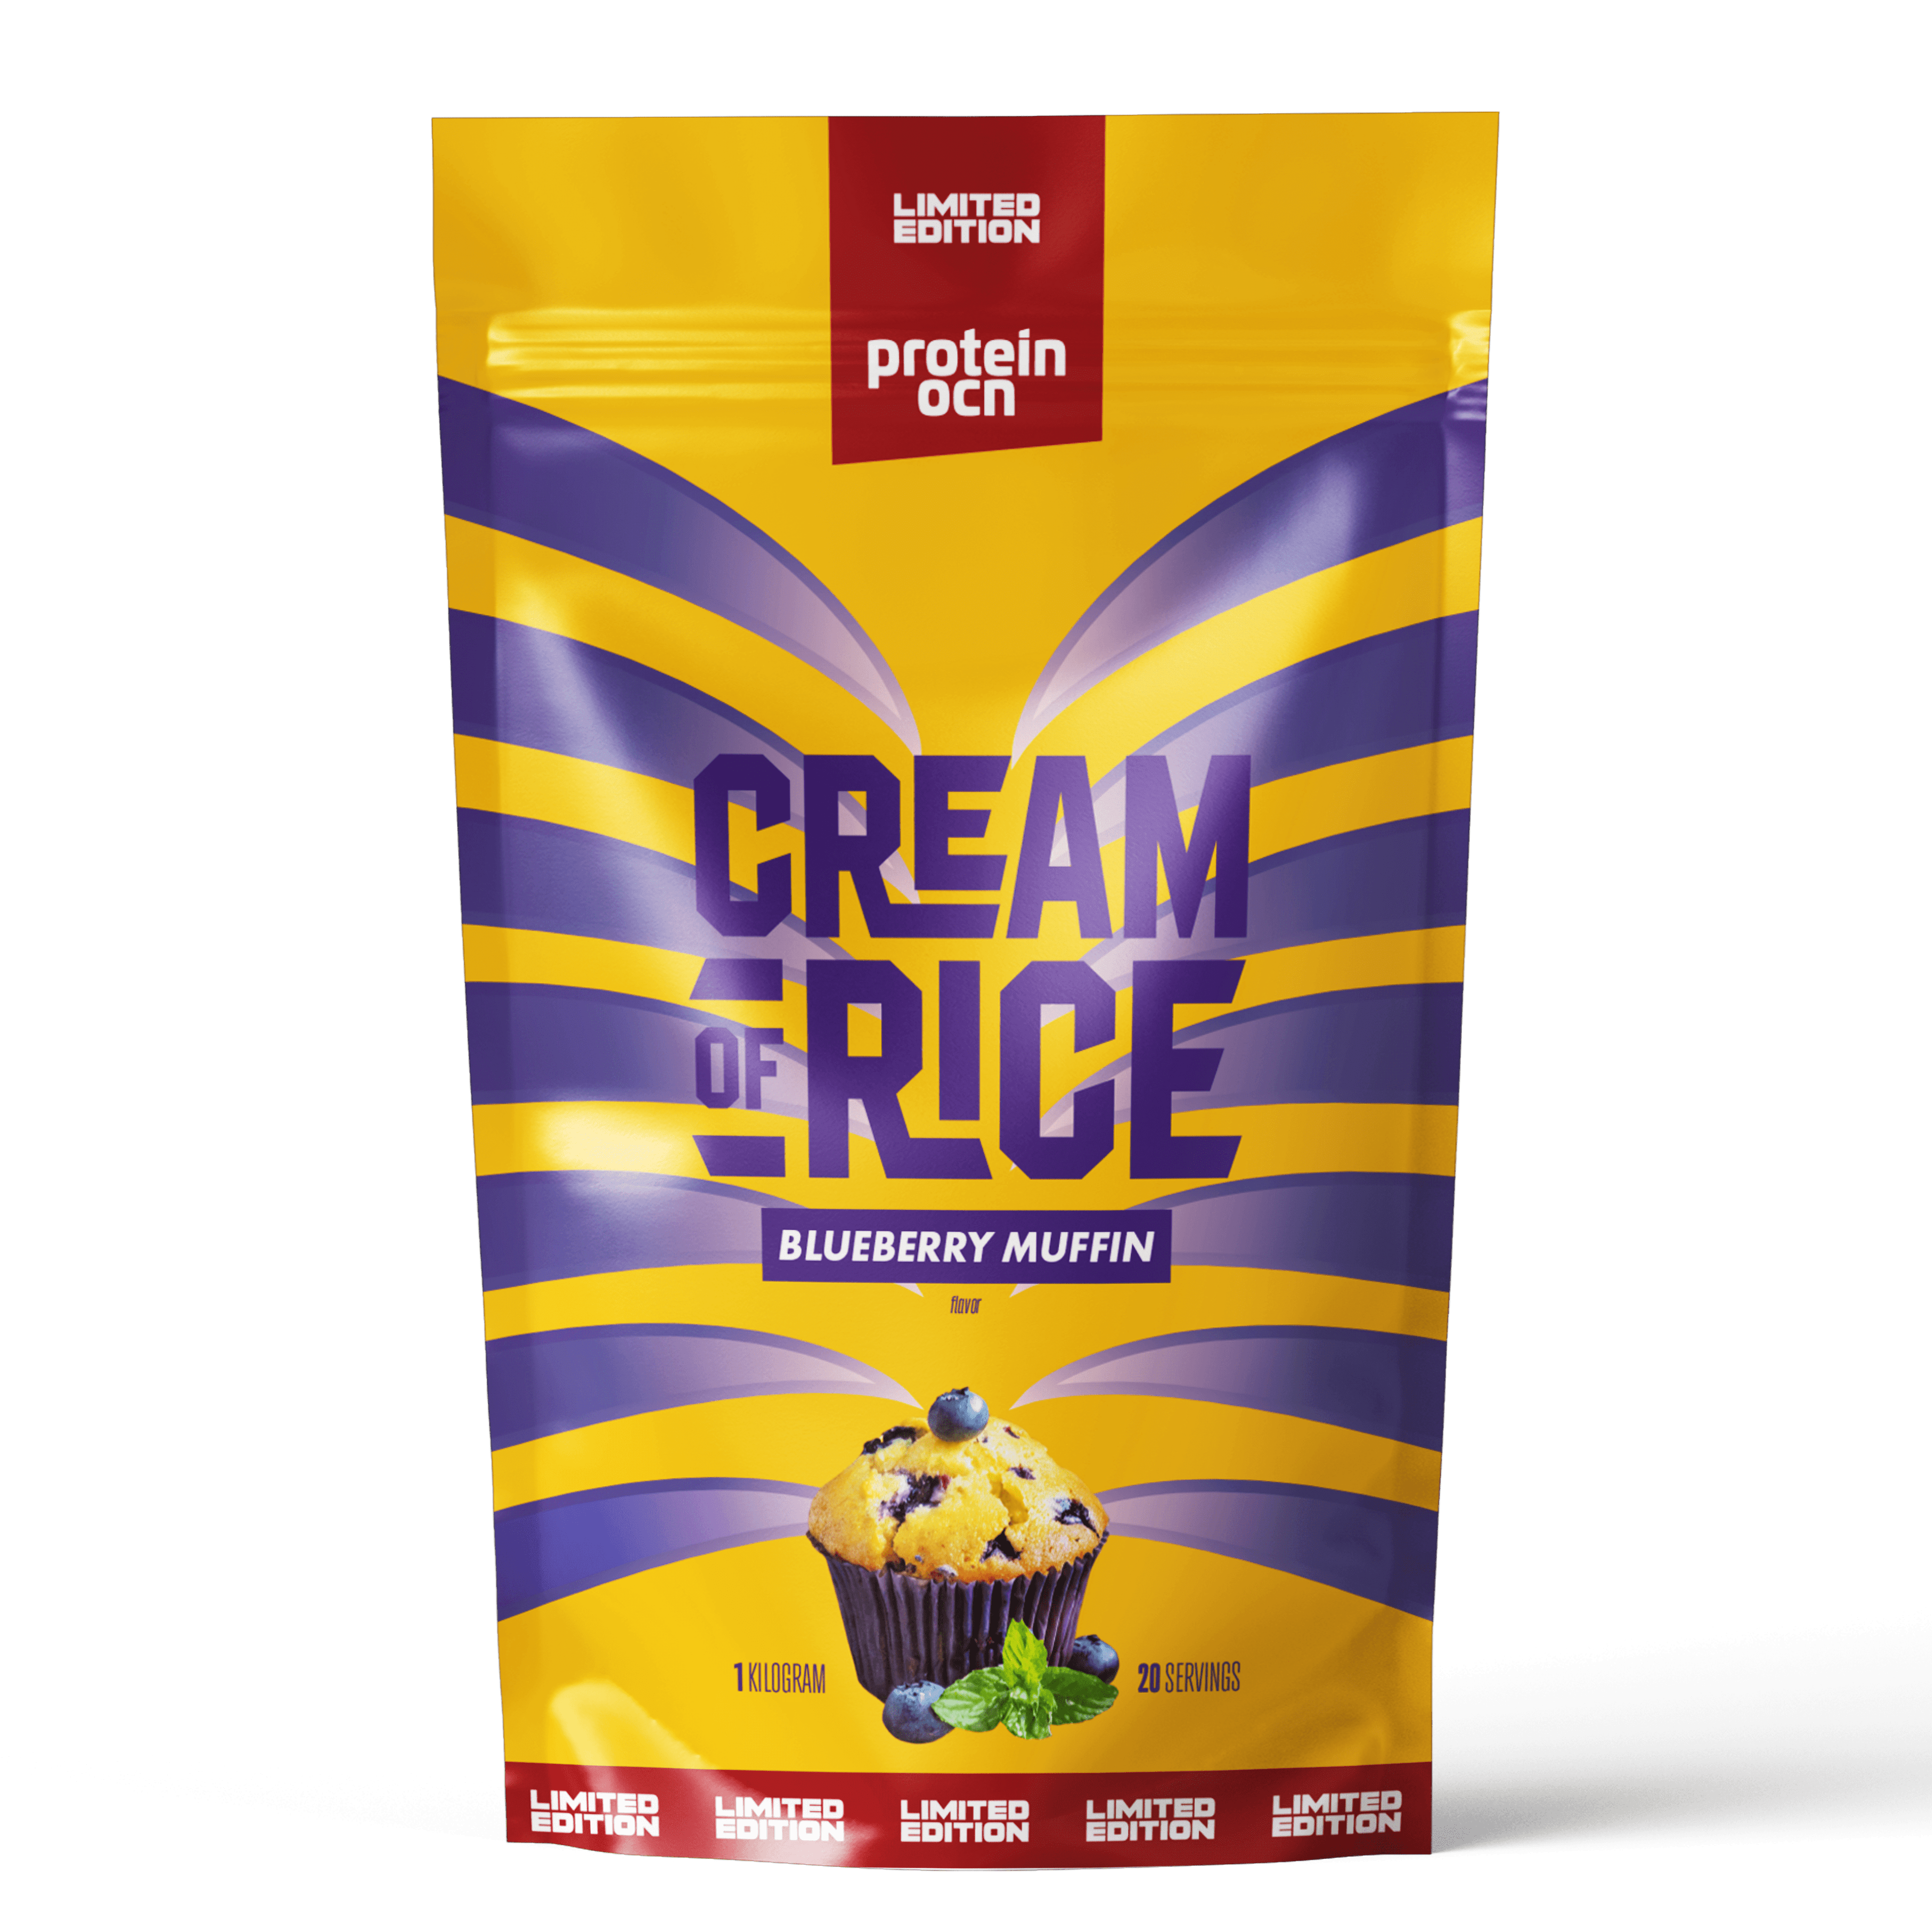 CREAM OF RICE LIMITED EDITION